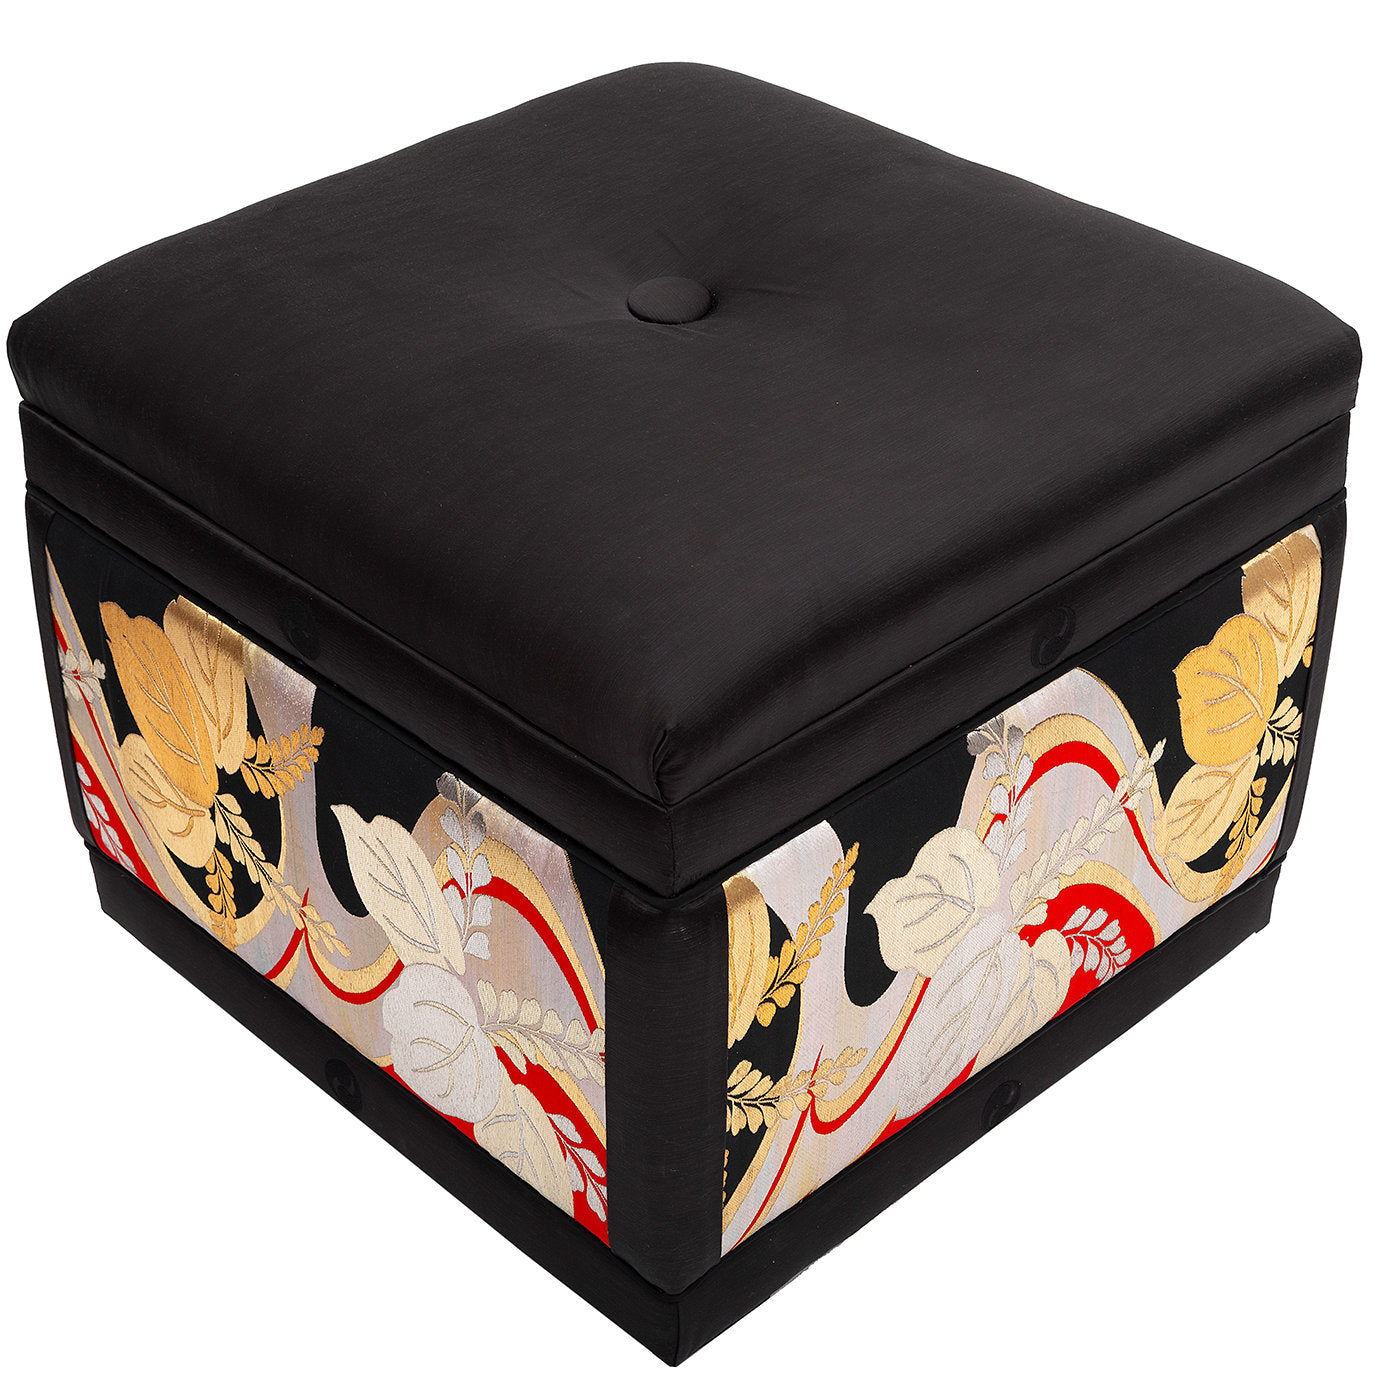 Ottoman Covered With Antique Japanese Obi Sashes  - Alternative view 3